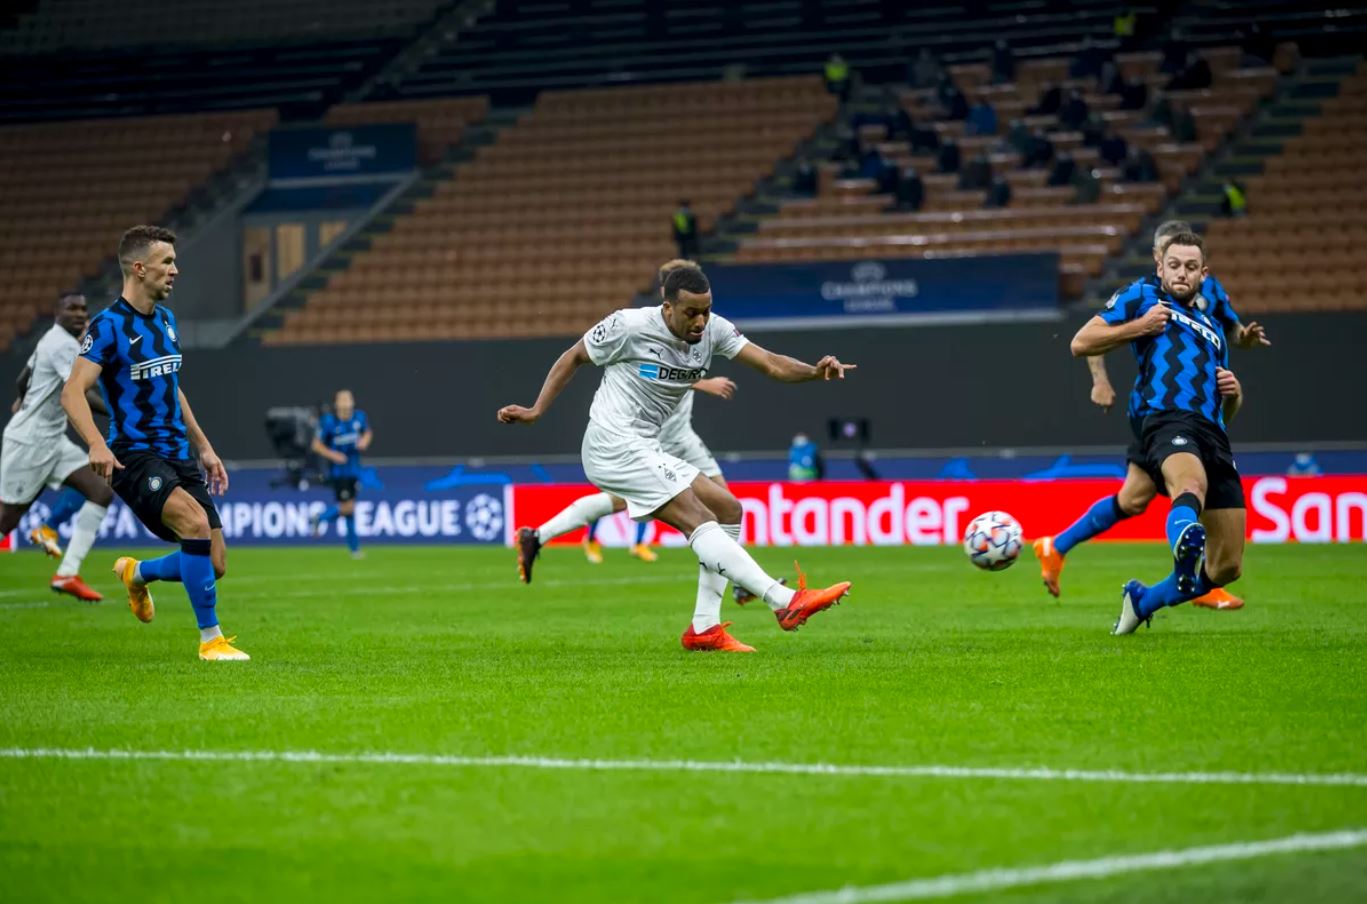 Rodrygo scored the third for Real Madrid a few minutes after making his entrance to the pitch to wrap his side's 3-2 win over Inter